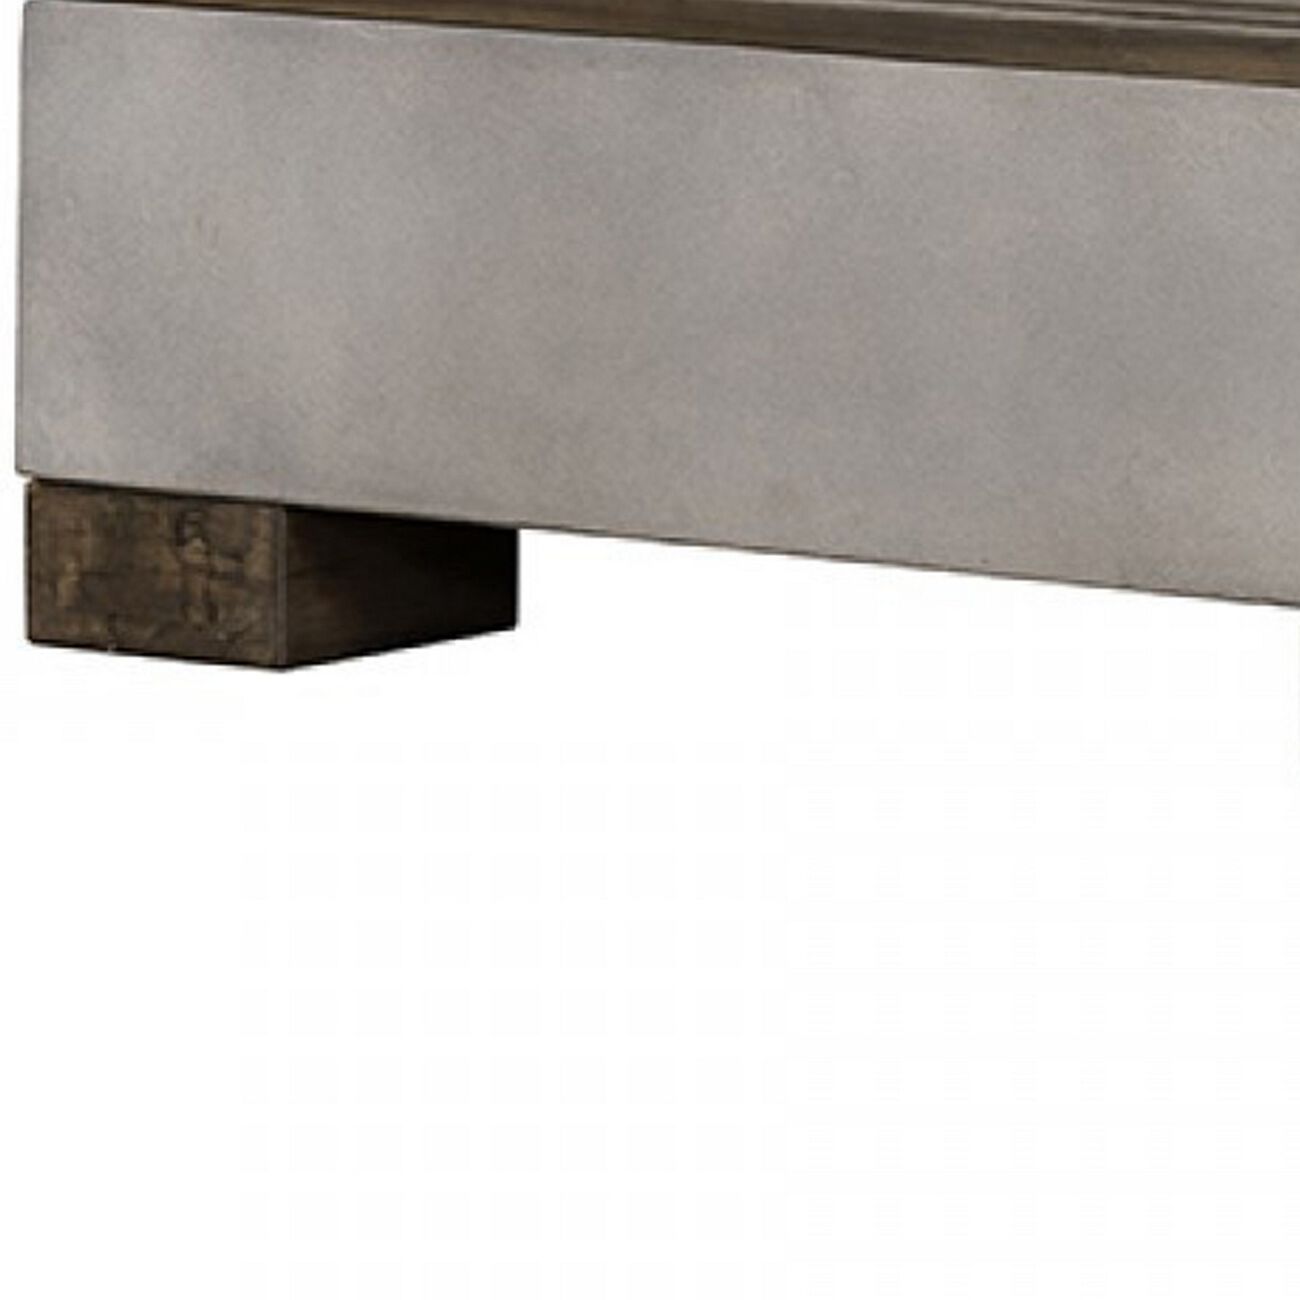 Square Coffee Table with Concrete and Slated Wooden Top, Gray and Brown